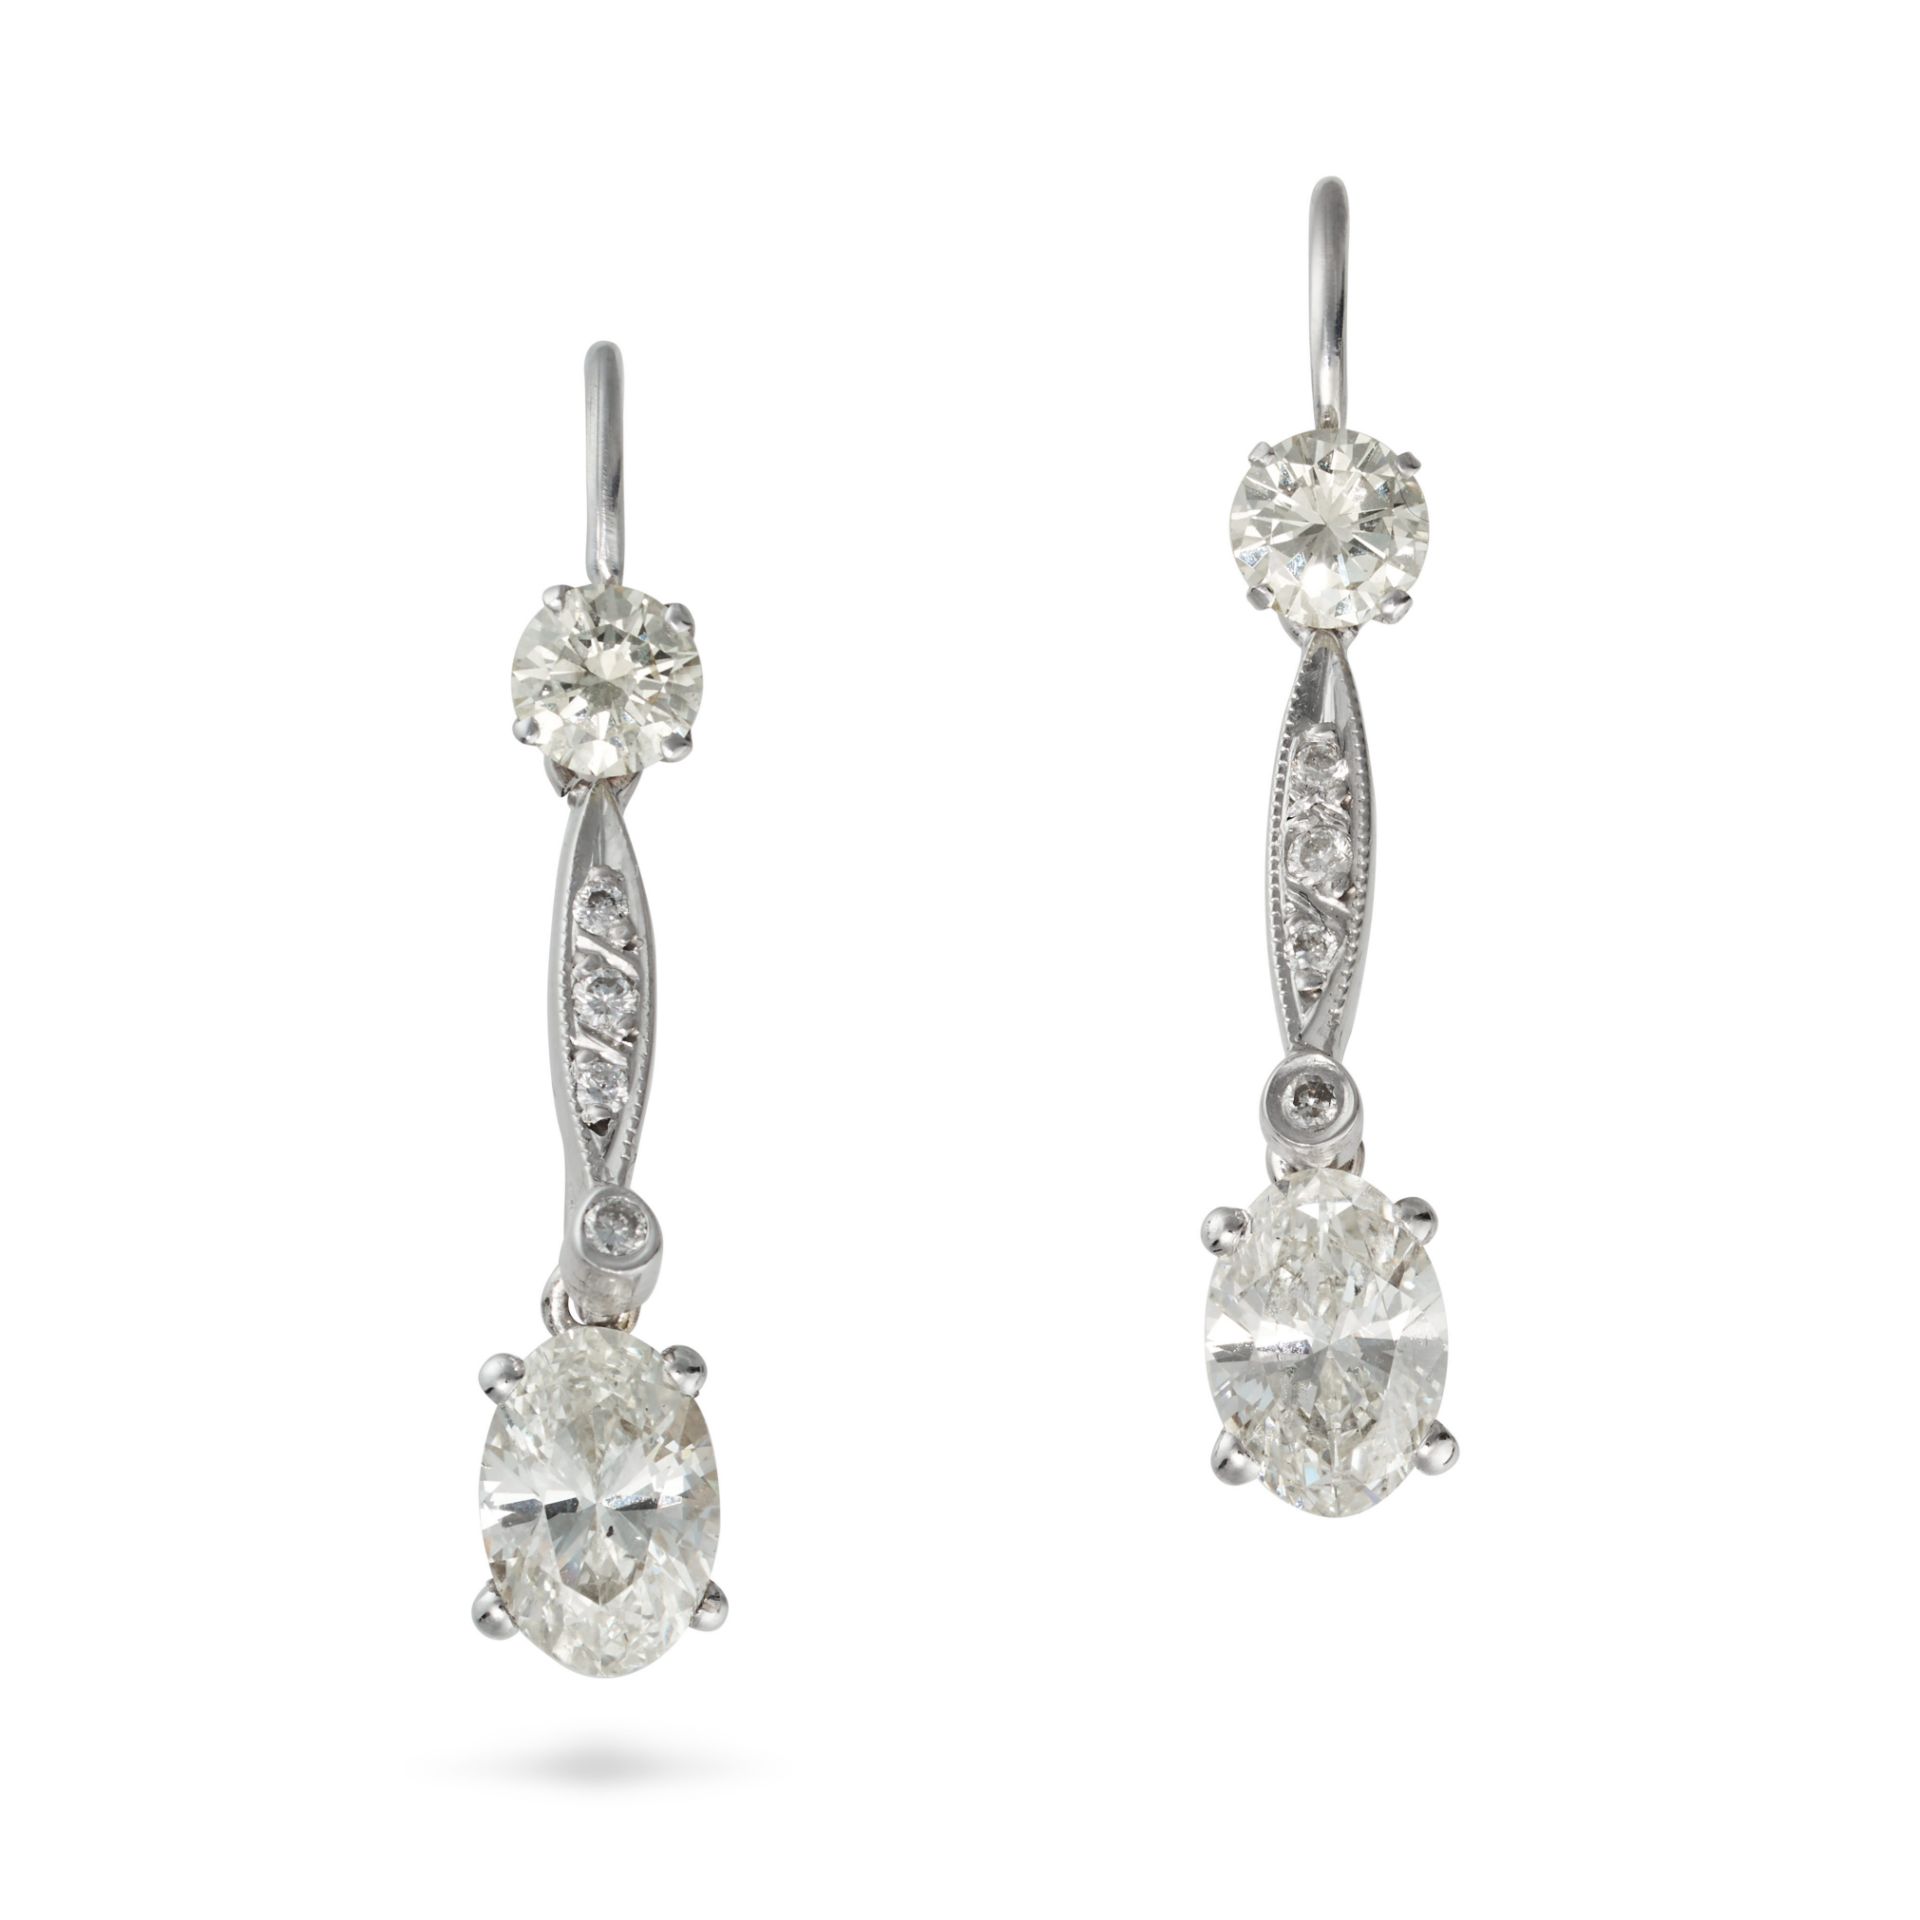 A PAIR OF DIAMOND DROP EARRINGS in white gold, each set with a round brilliant cut diamond suspen...